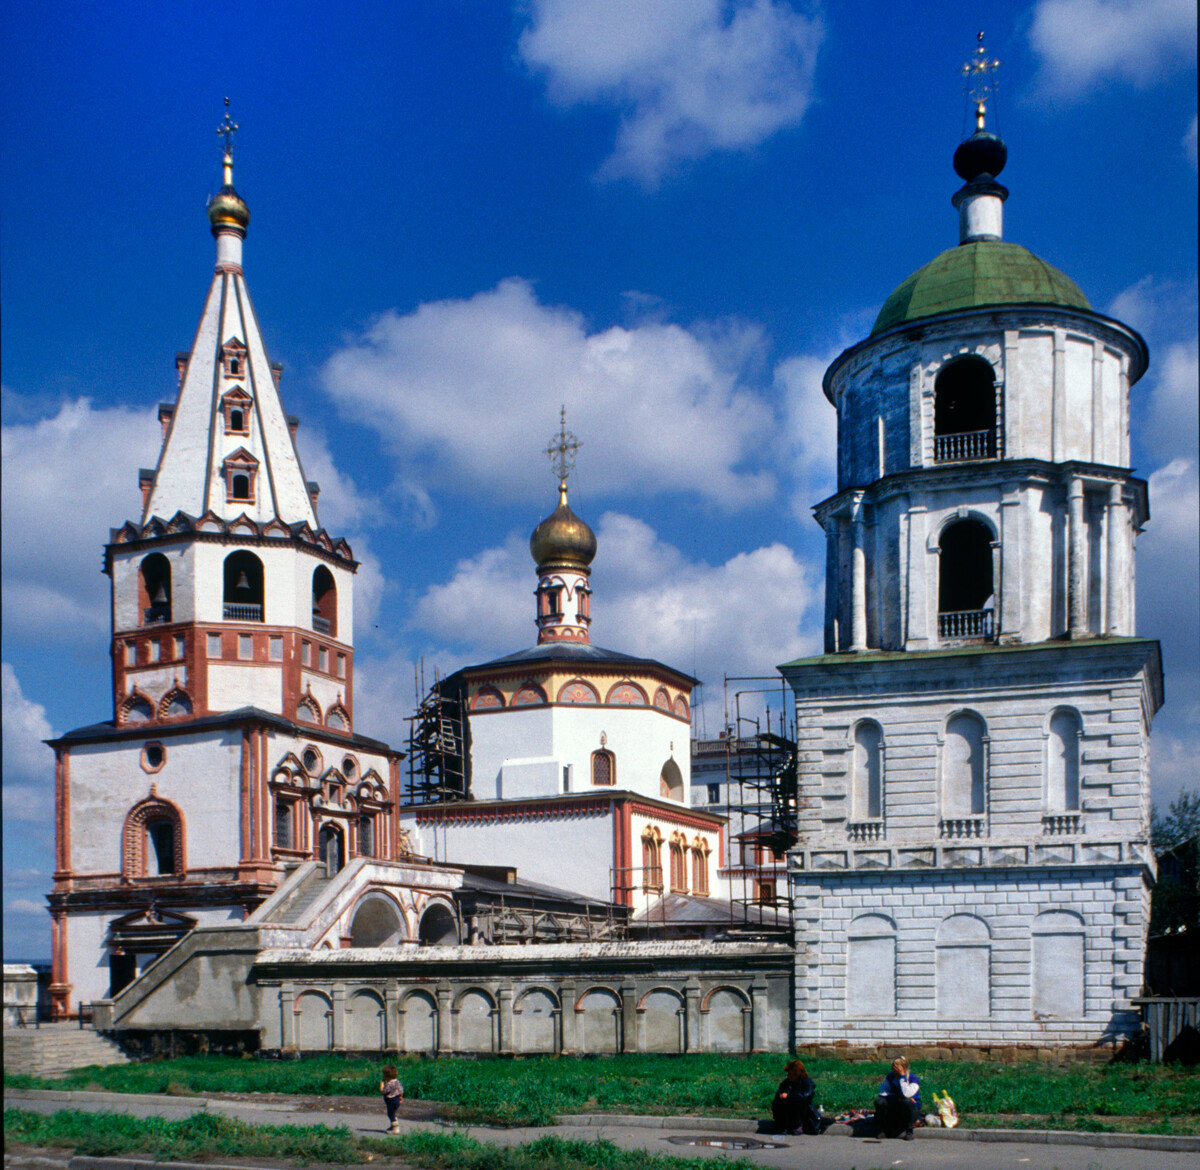 Irkutsk. Cathedral of the Epiphany & bell tower, southwest view. Second bell tower (right) completed in 1815 to support a locally cast 18-ton bell. August 31, 2000